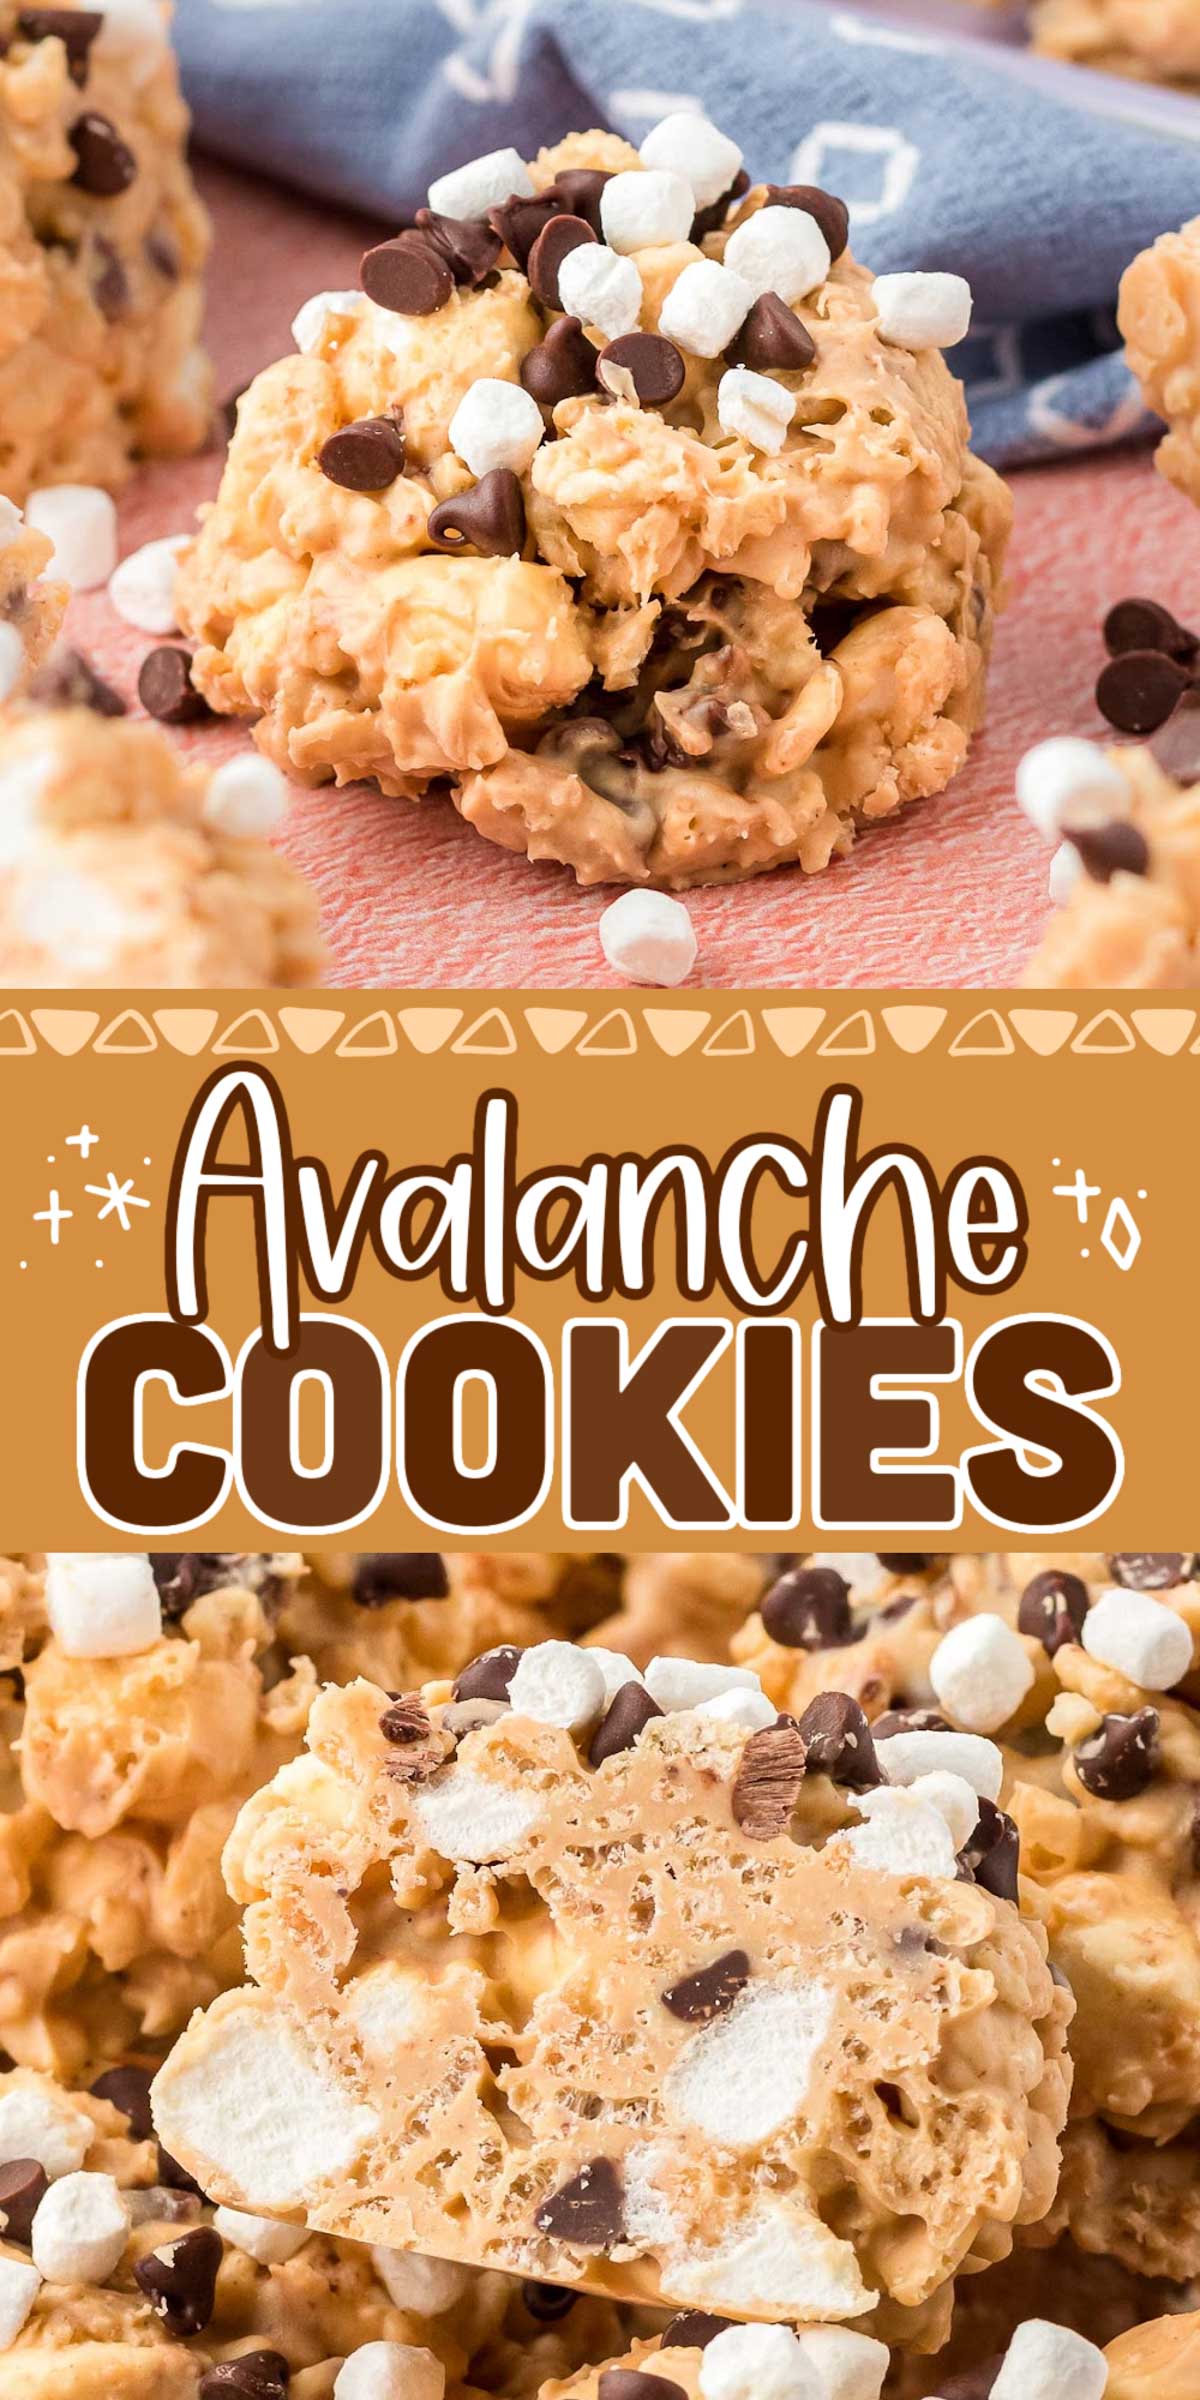 These Avalanche Cookies are a 6-ingredient no-bake treat made with Rice Krispies, peanut butter, white chocolate, marshmallows, and chocolate chips! They are super easy to make and hard to stop eating! via @sugarandsoulco